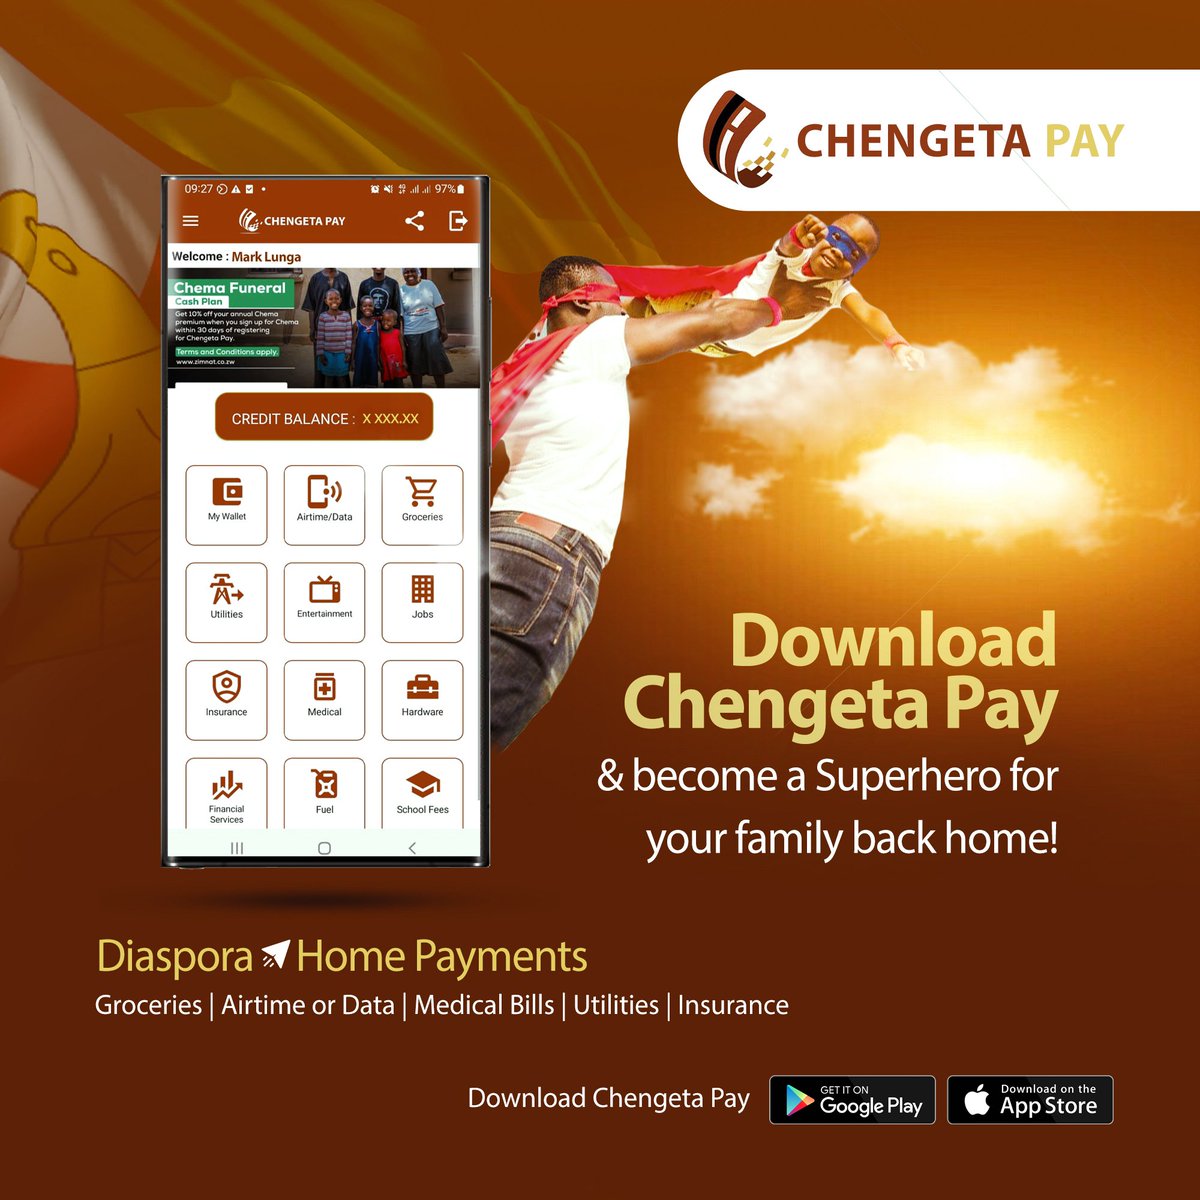 Every breadwinner needs Superhero powers. Chengeta Pay enables you to buy & pay for services back directly from the Diaspora with ease. #ChengetaPay #InternationalPayments